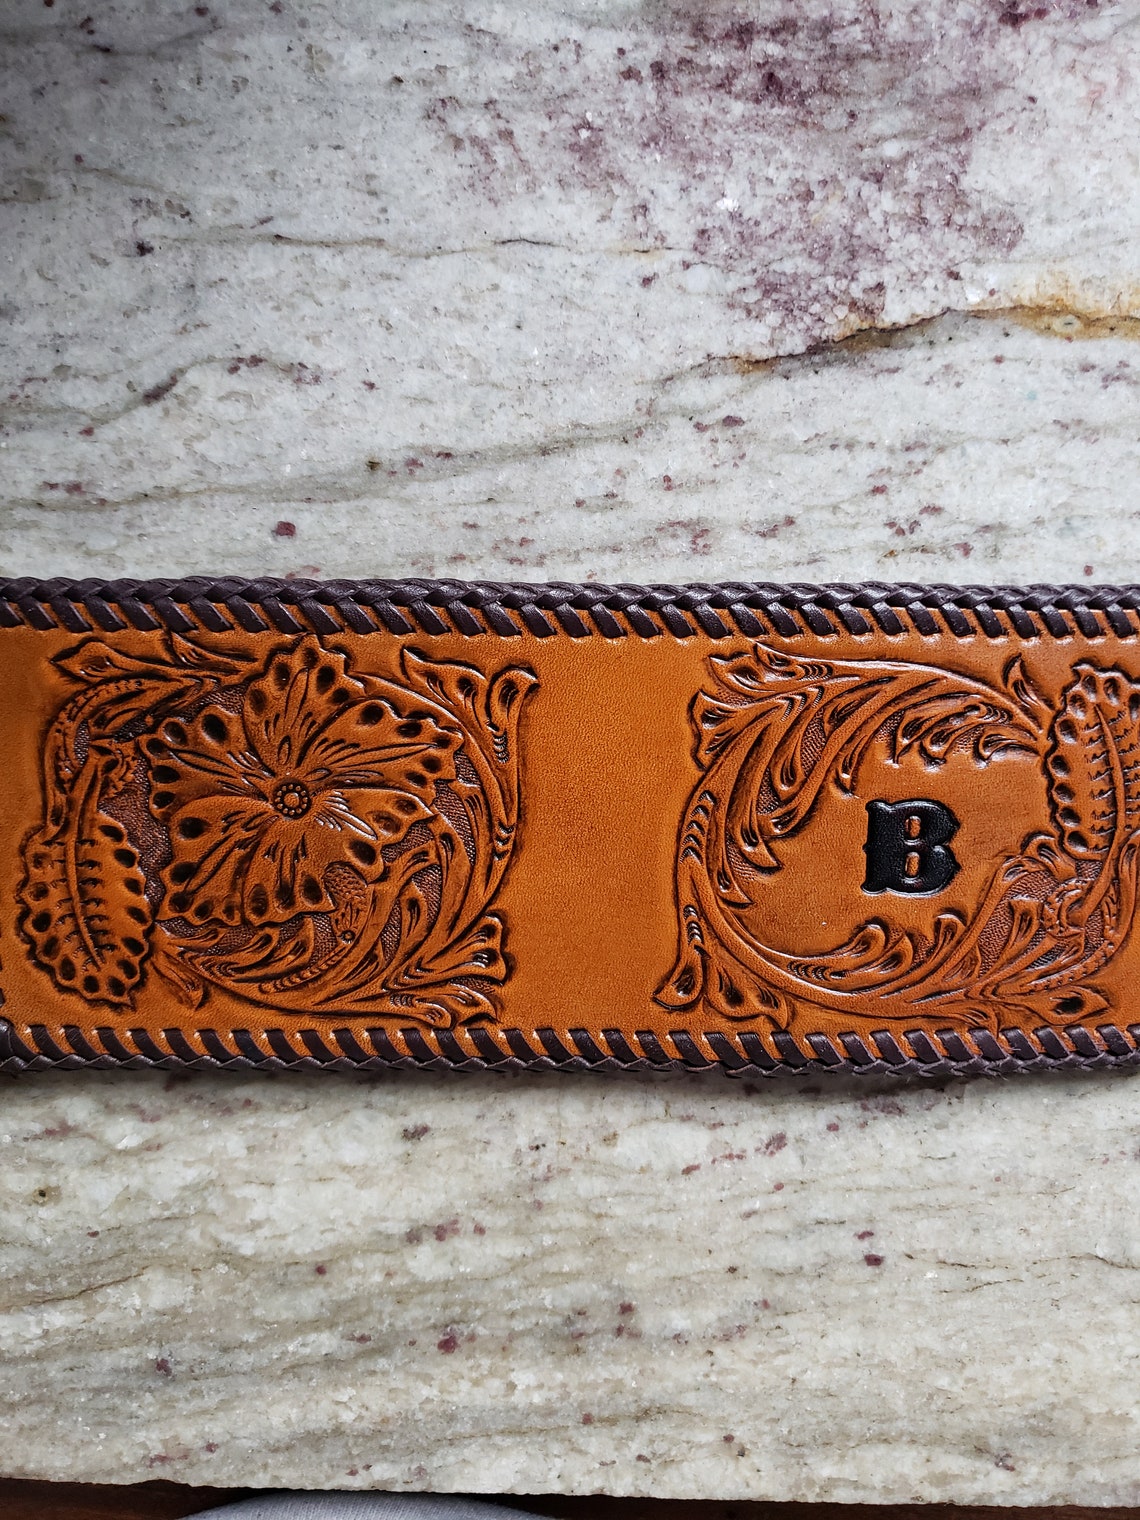 Sheridan Style Hand Tooled Leather Wallet - Etsy